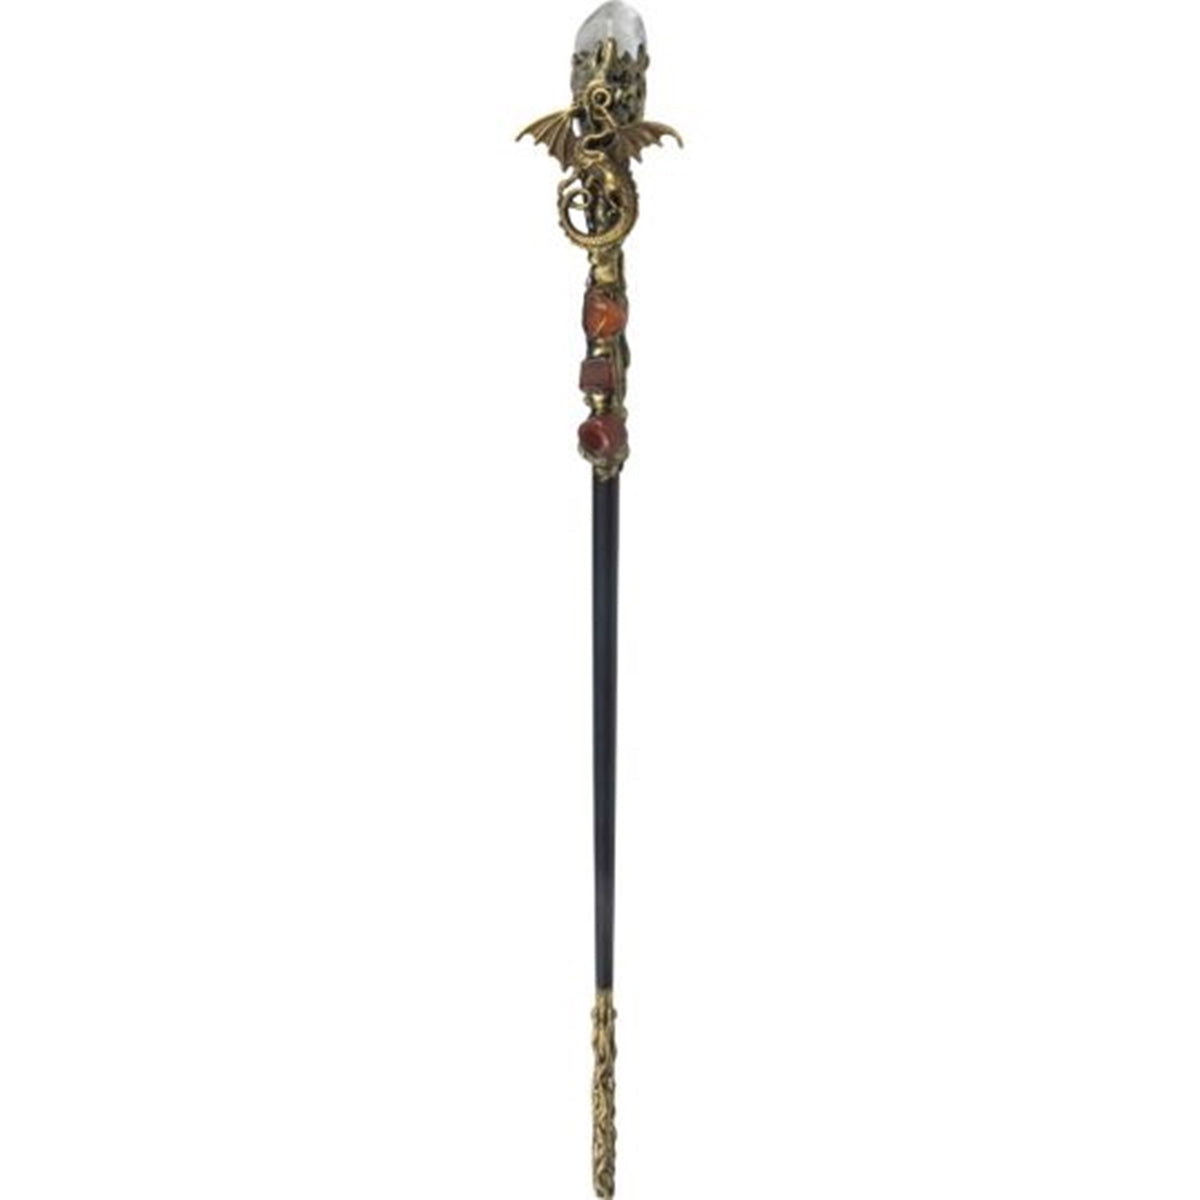 Magick Scepter with Gold Dragon and Clear Quartz